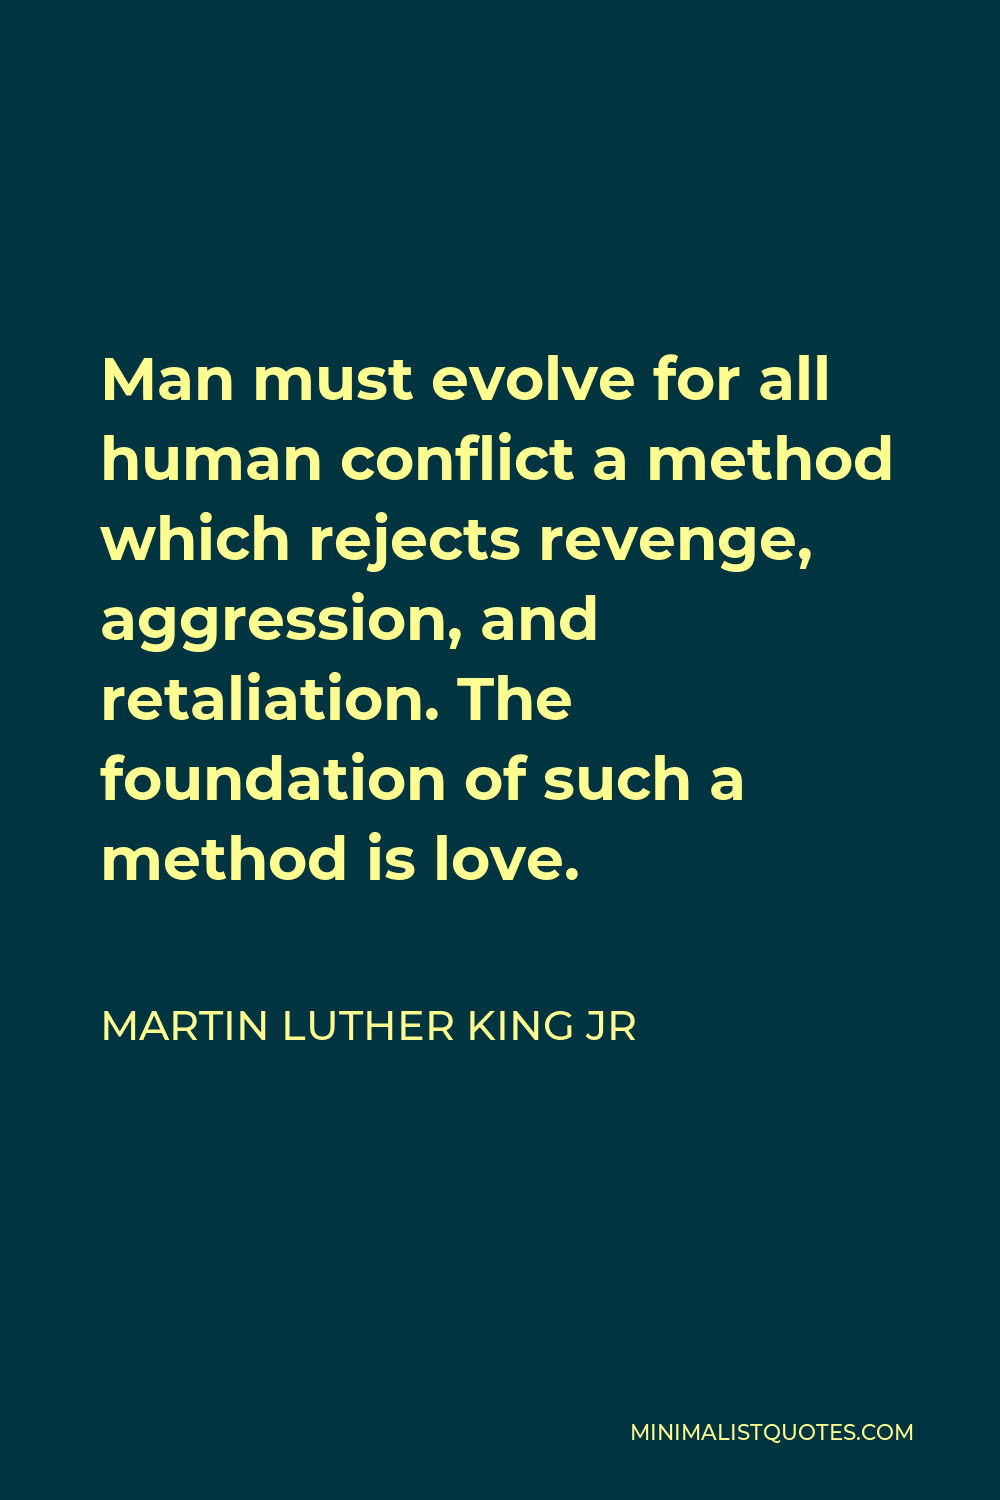 Martin Luther King Jr Quote - Man must evolve for all human conflict a method which rejects revenge, aggression, and retaliation. The foundation of such a method is love.